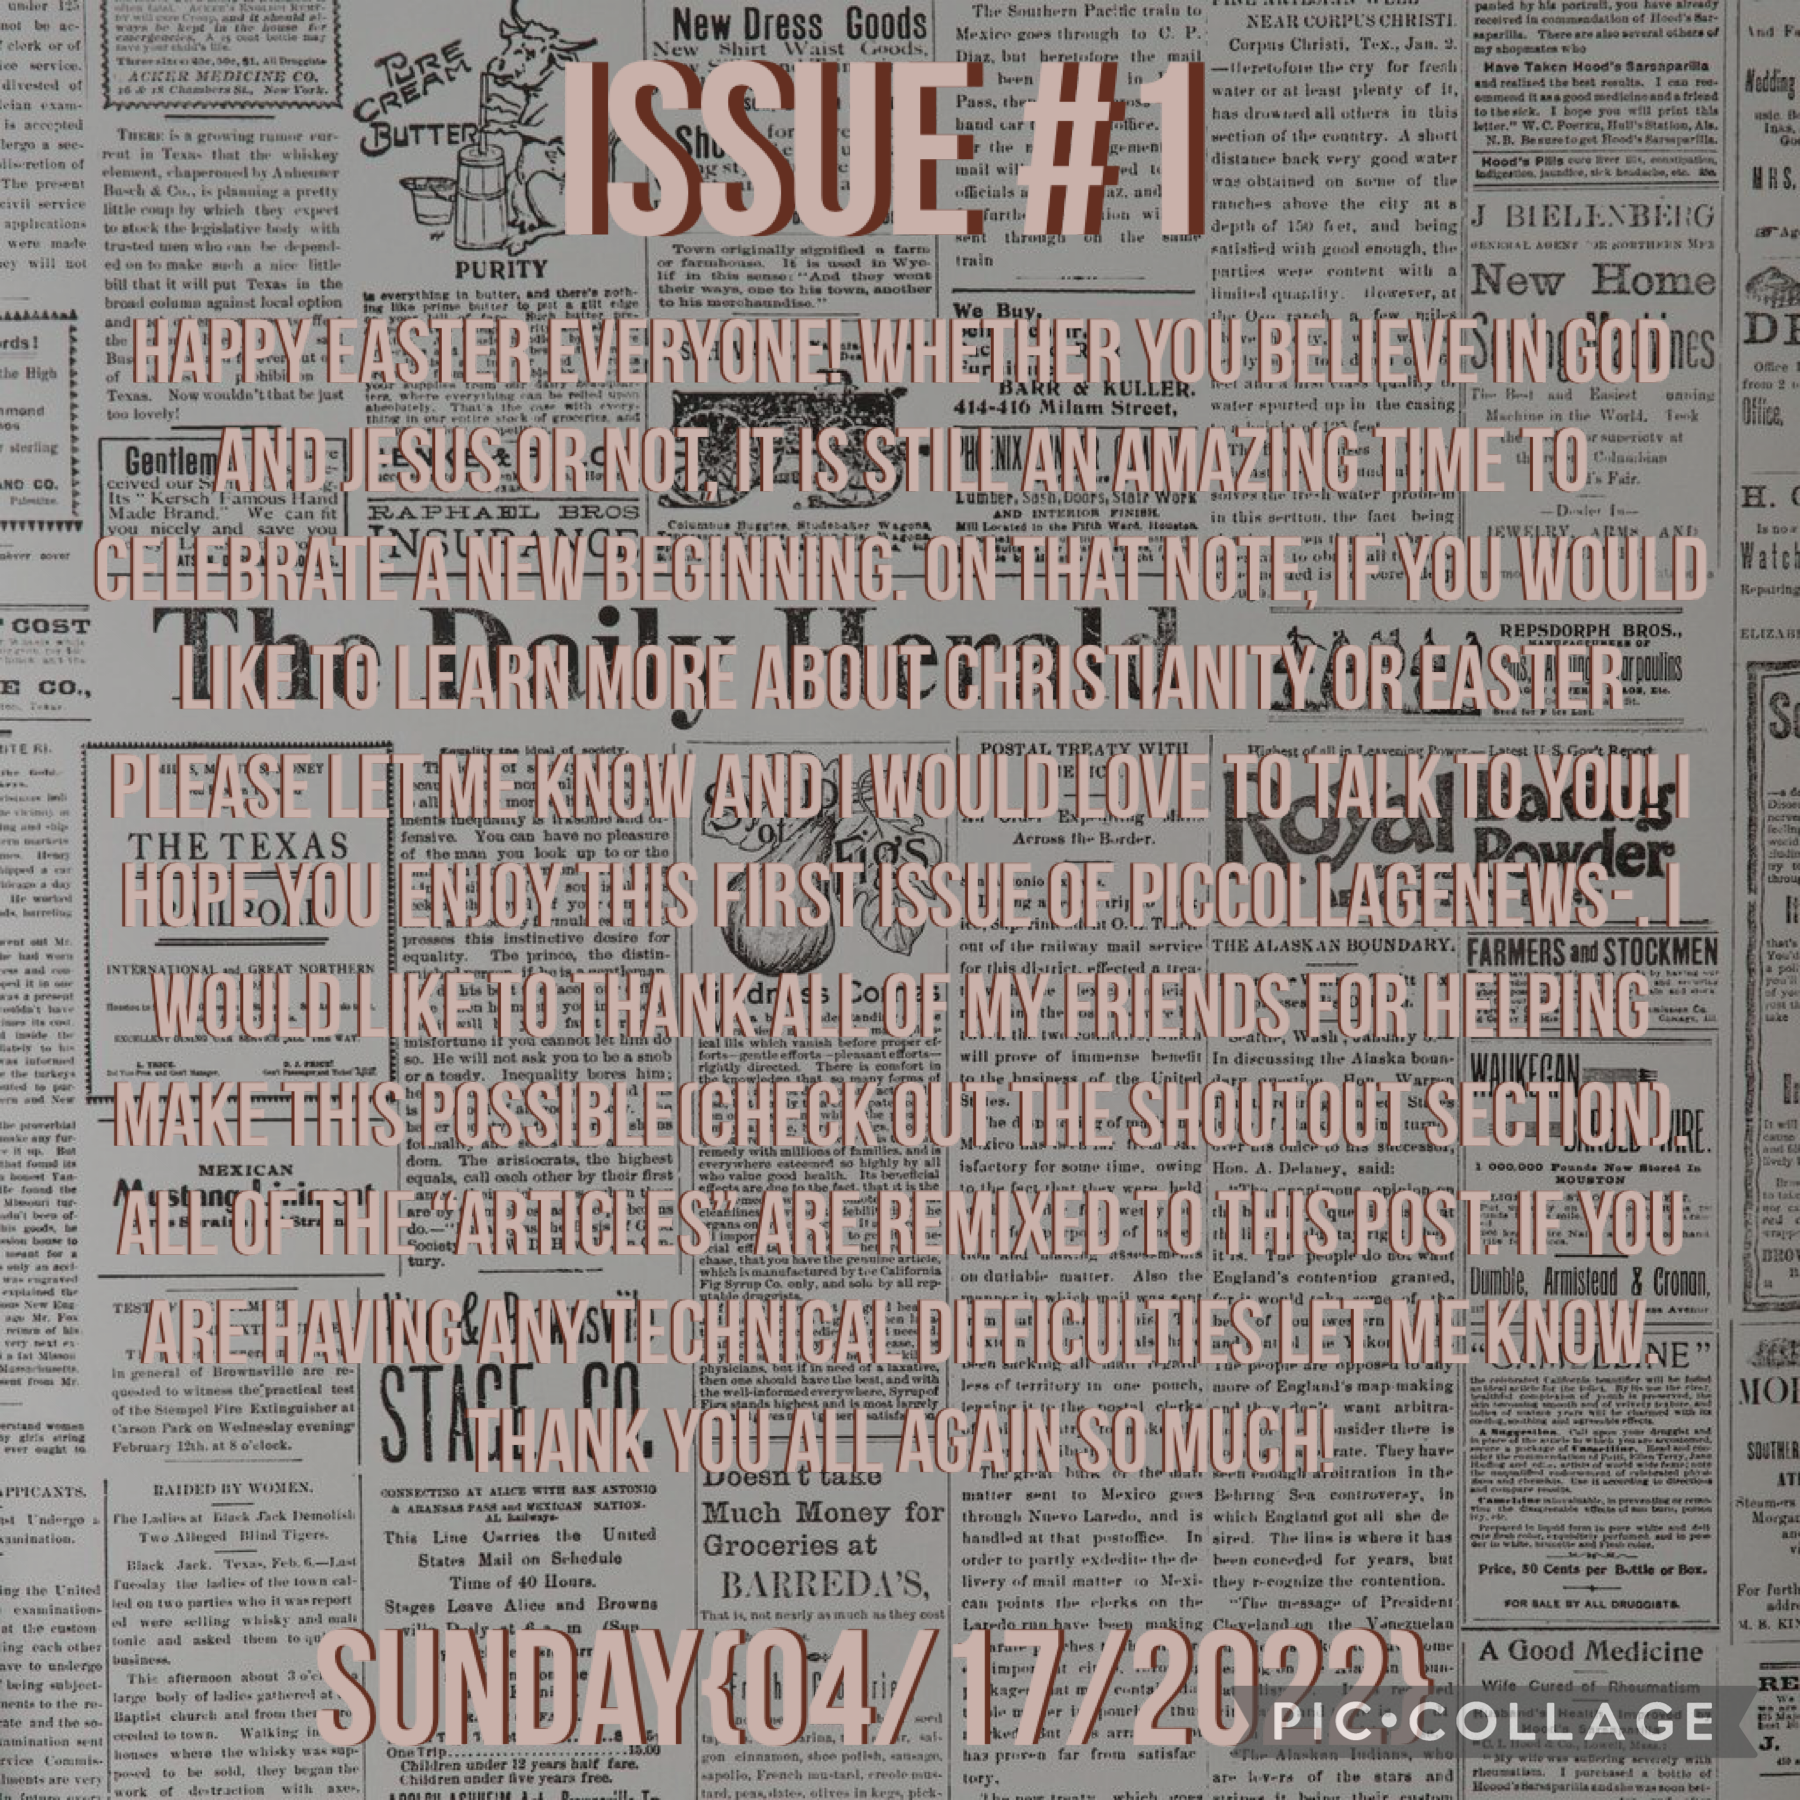 ISSUE #1